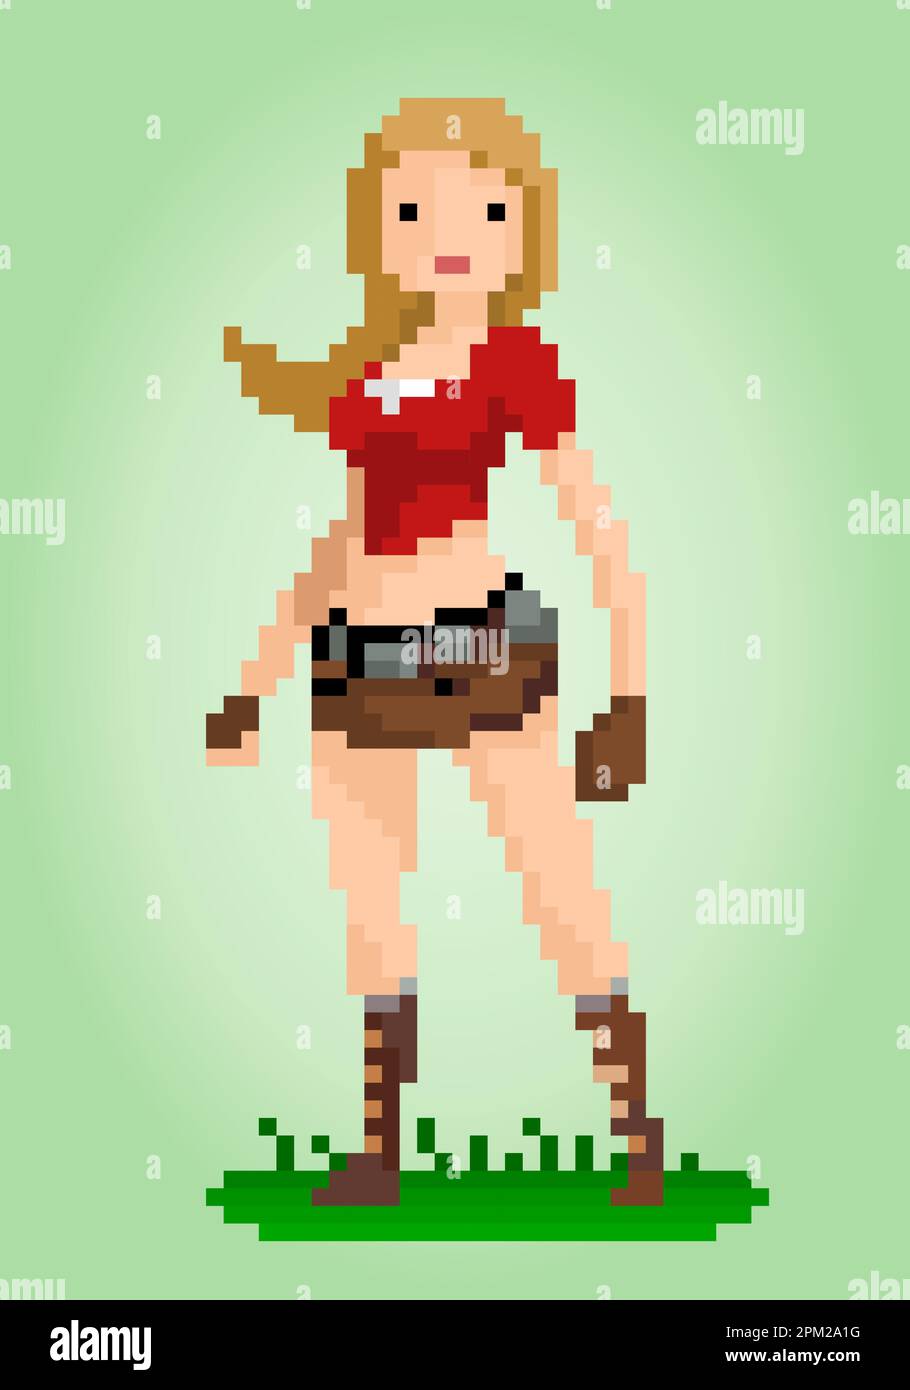 8 bit pixel a hero girl. Woman pixels for game assets and cross stitch patterns in vector illustrations. Stock Vector